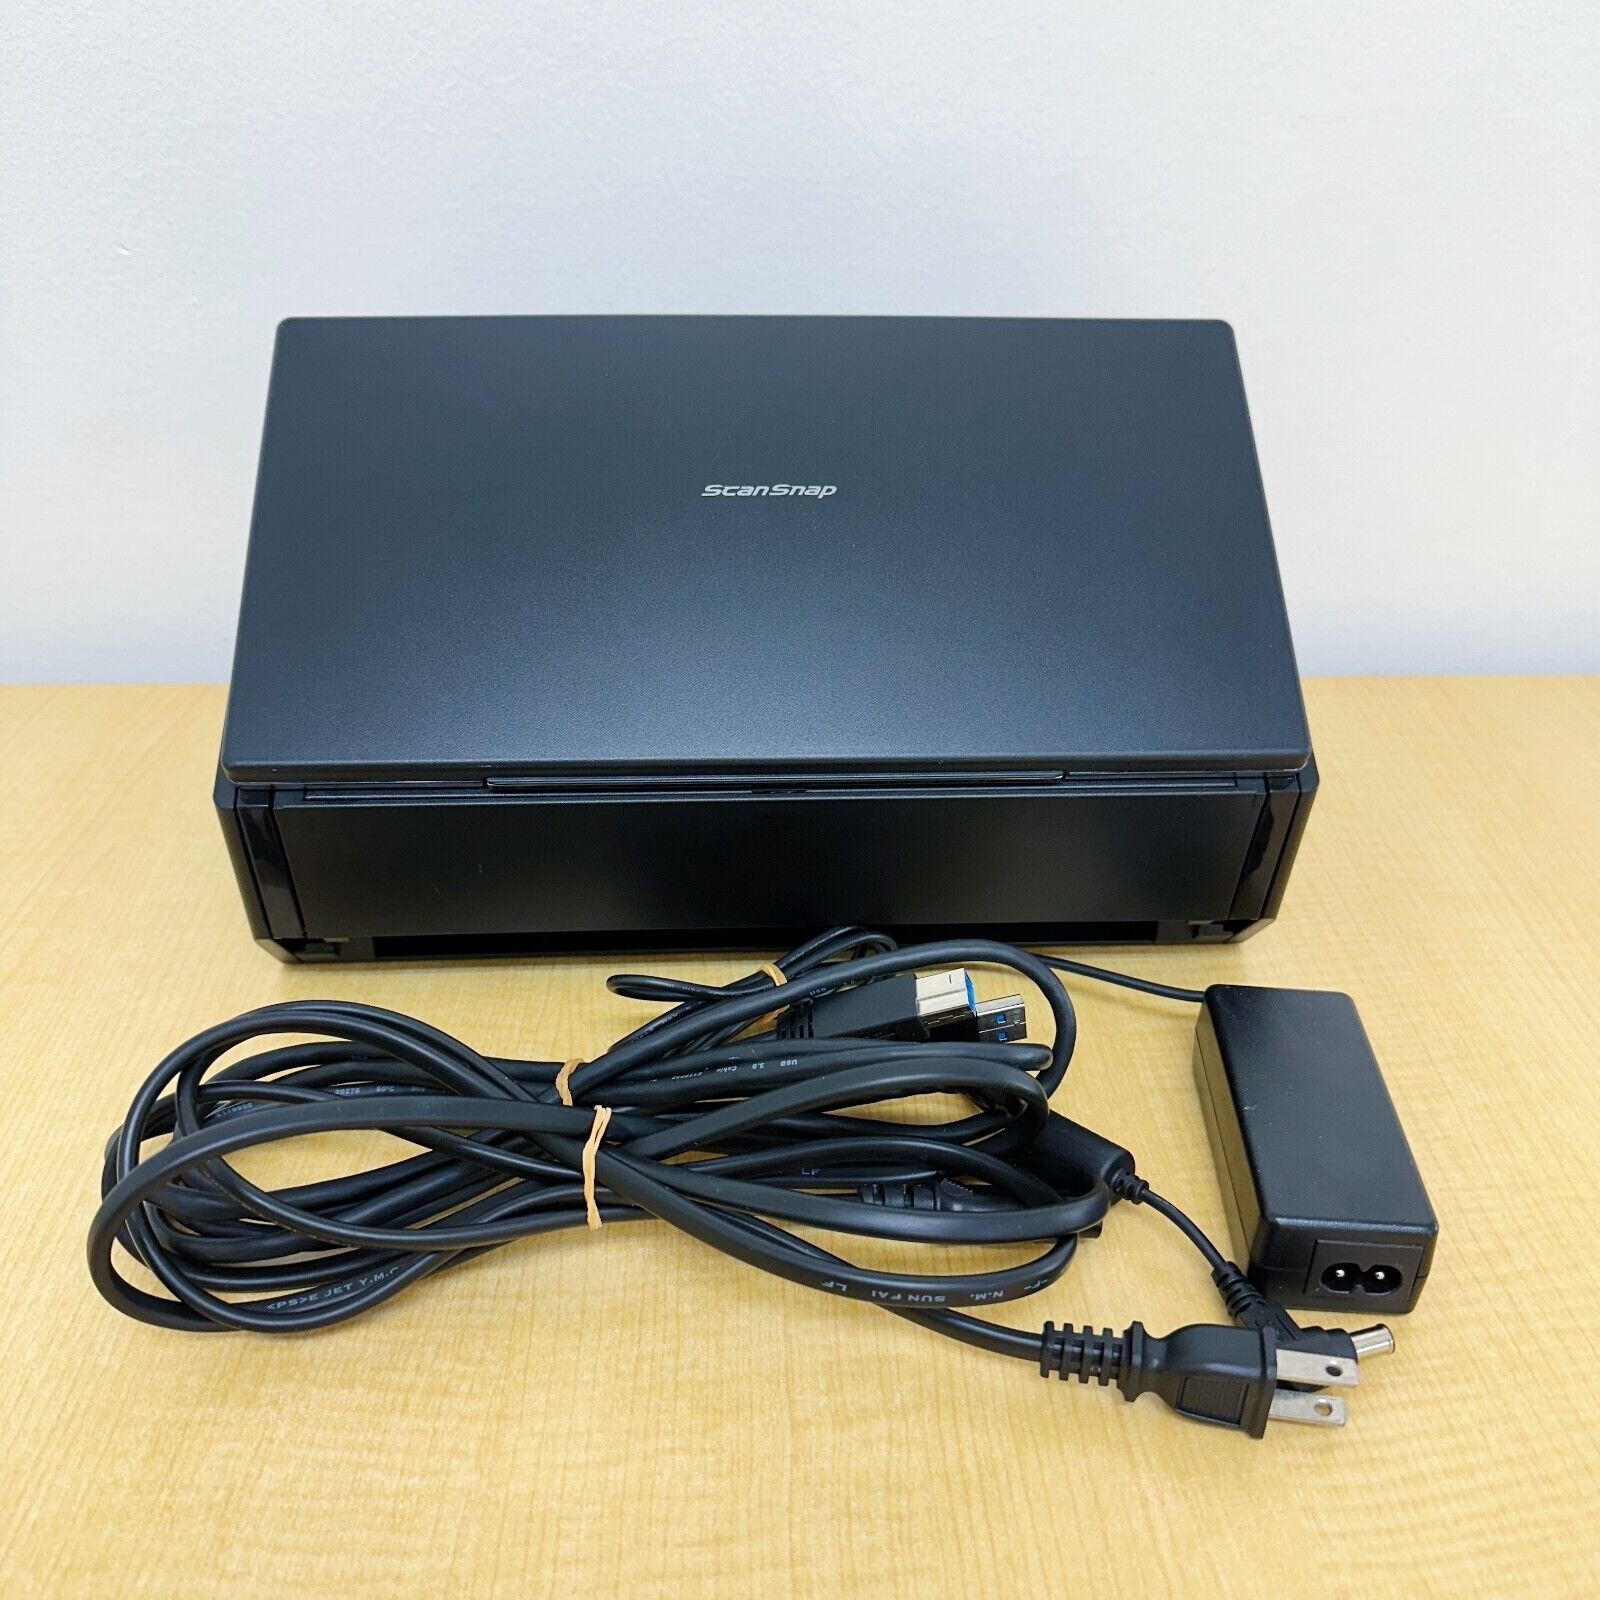 Fujitsu ScanSnap iX500 Color Image Document Scanner FI-IX500 W/ Adapter Cable